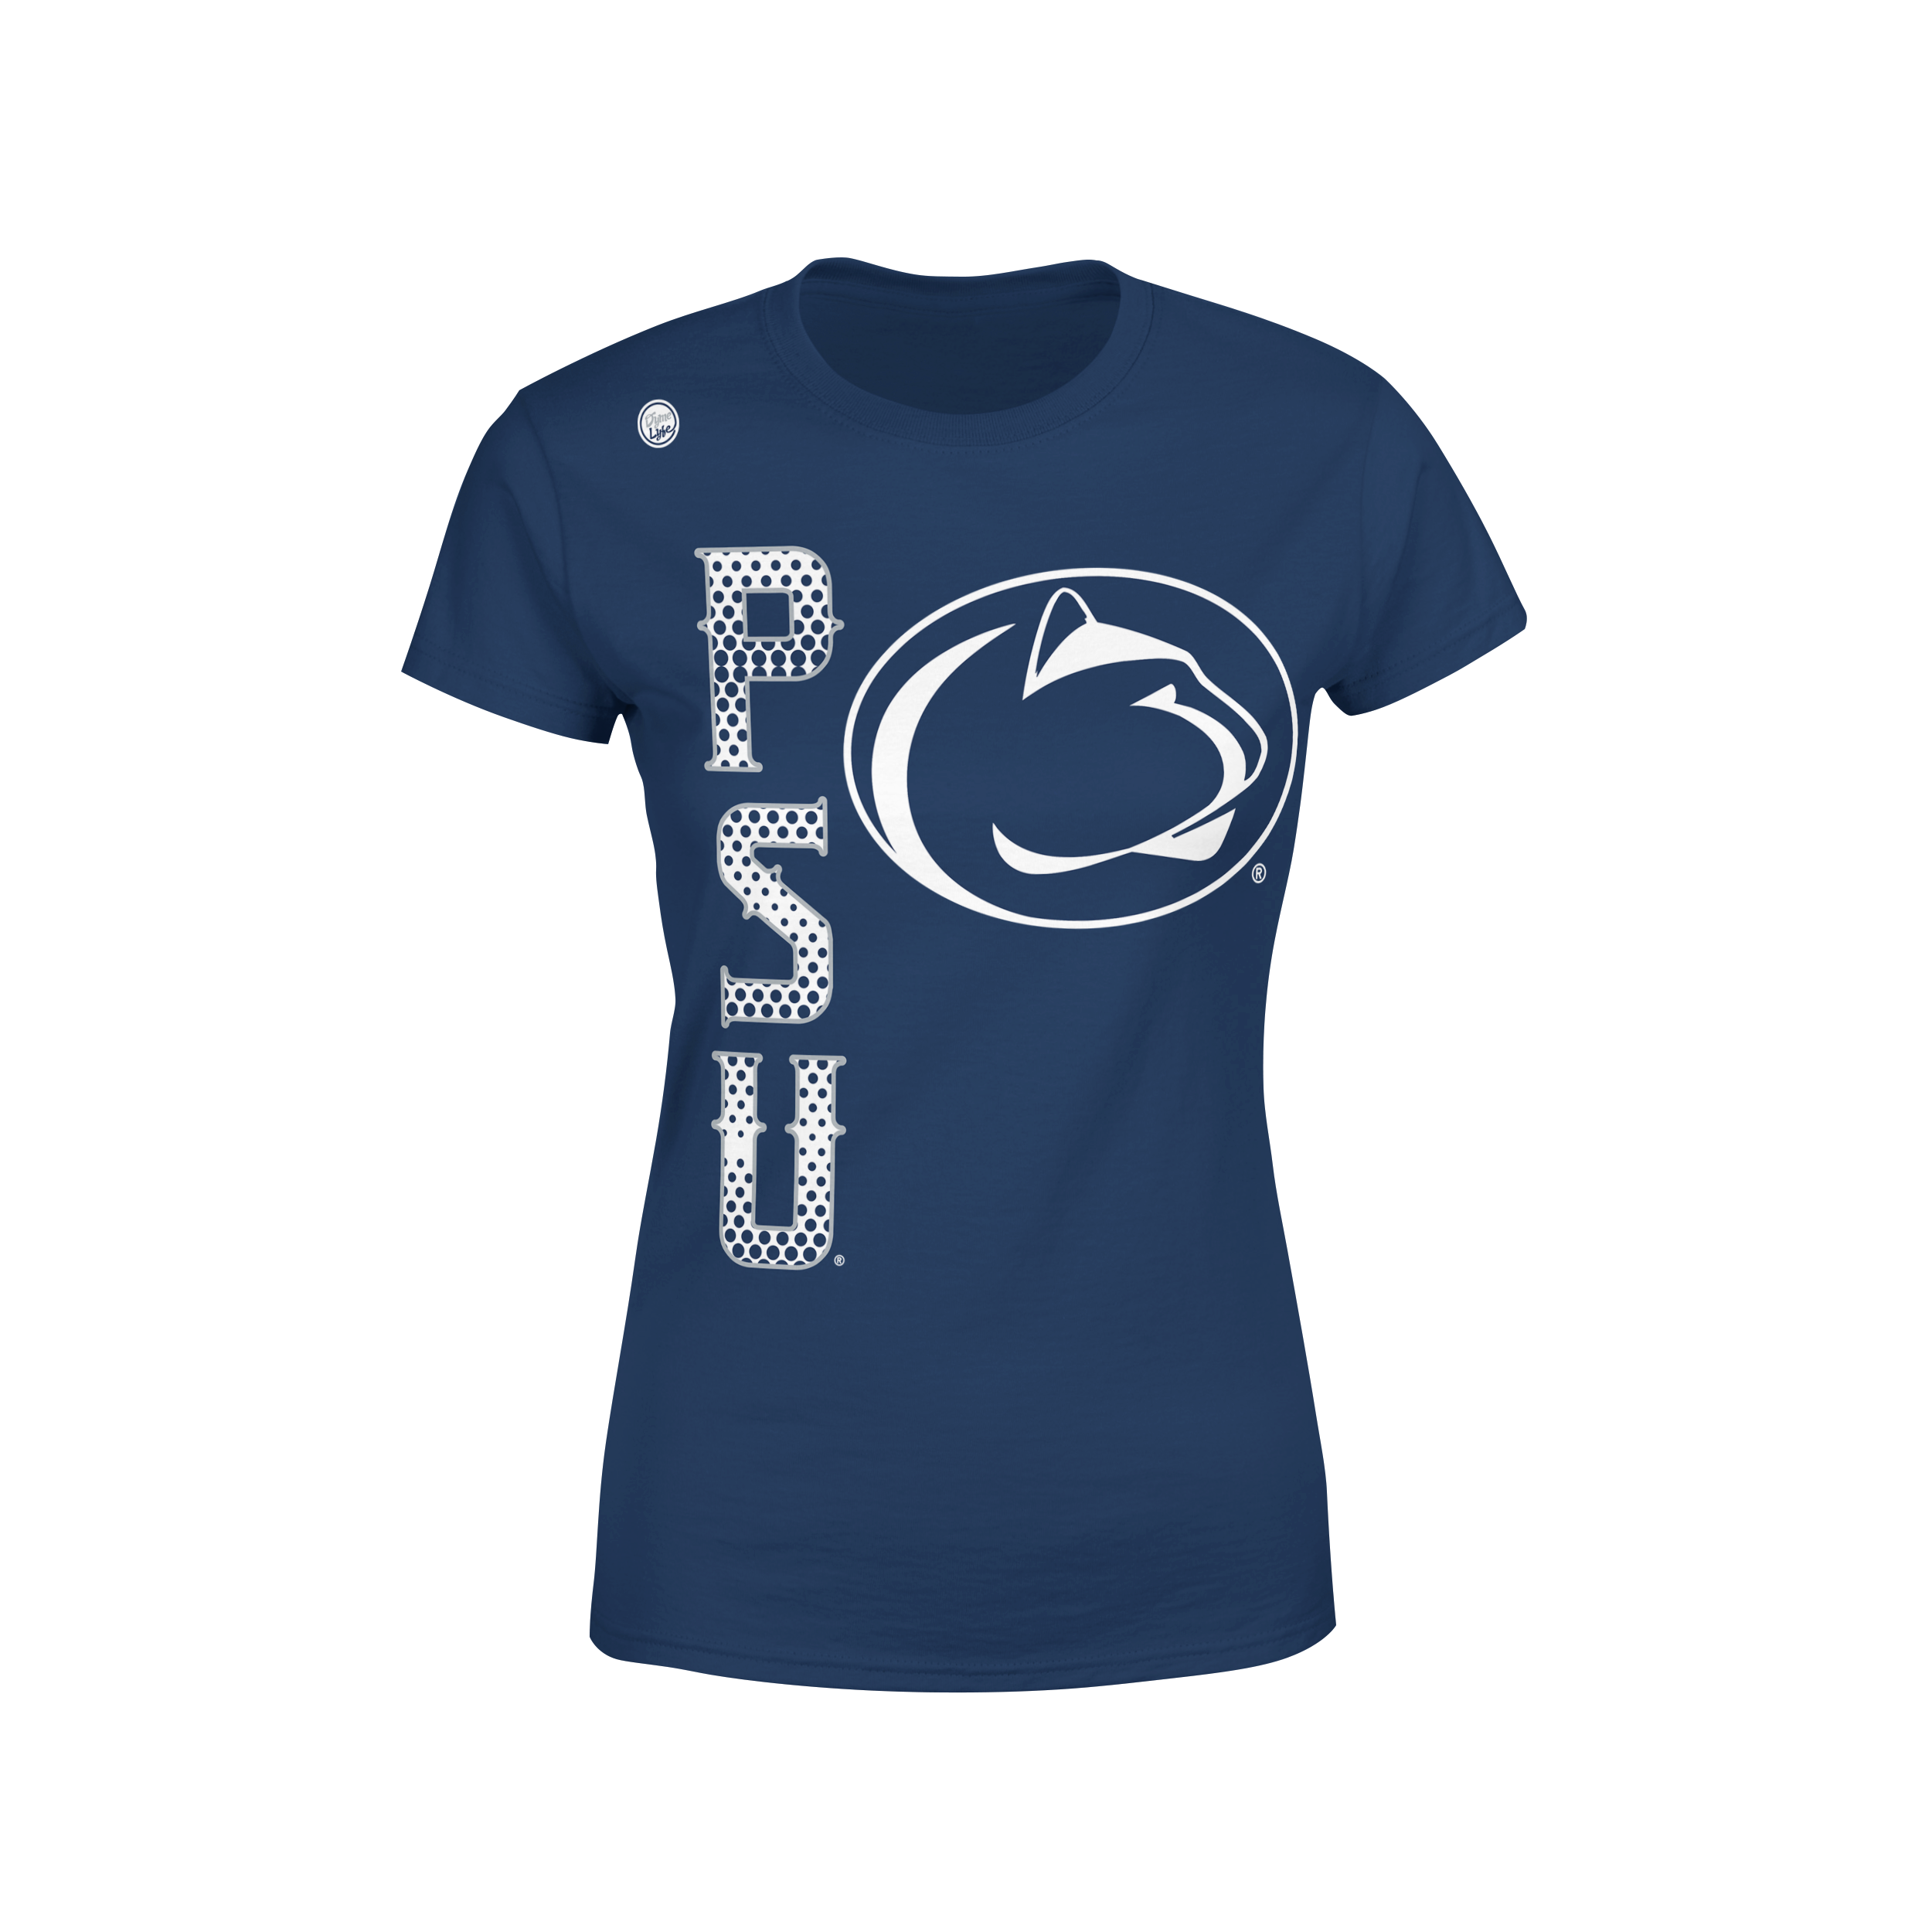 Penn State Nittany Lions Women’s Ace Tee